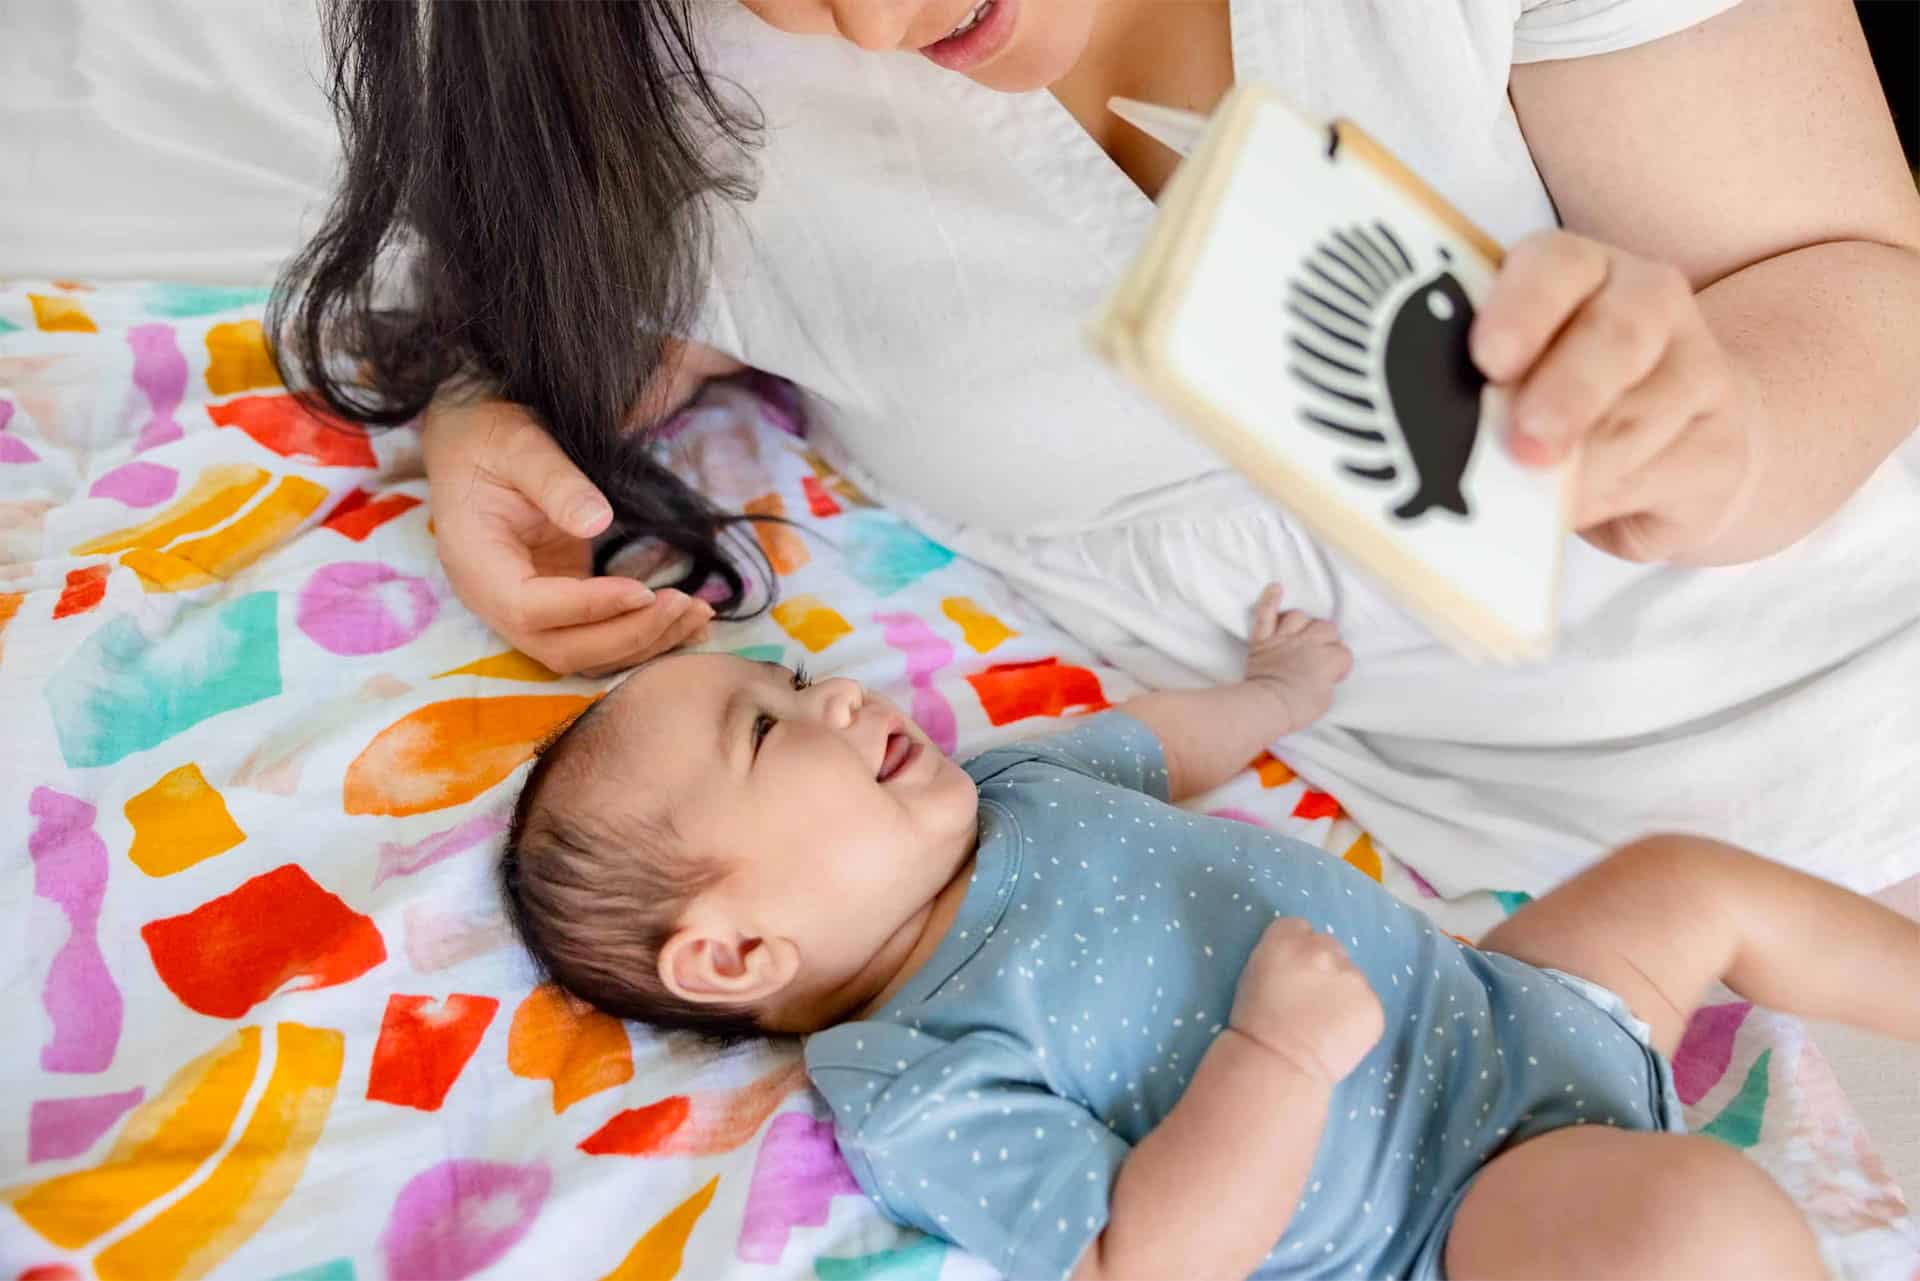 Mum's 12 Must-Have Baby Gifts: Perfect Presents for Newborns –